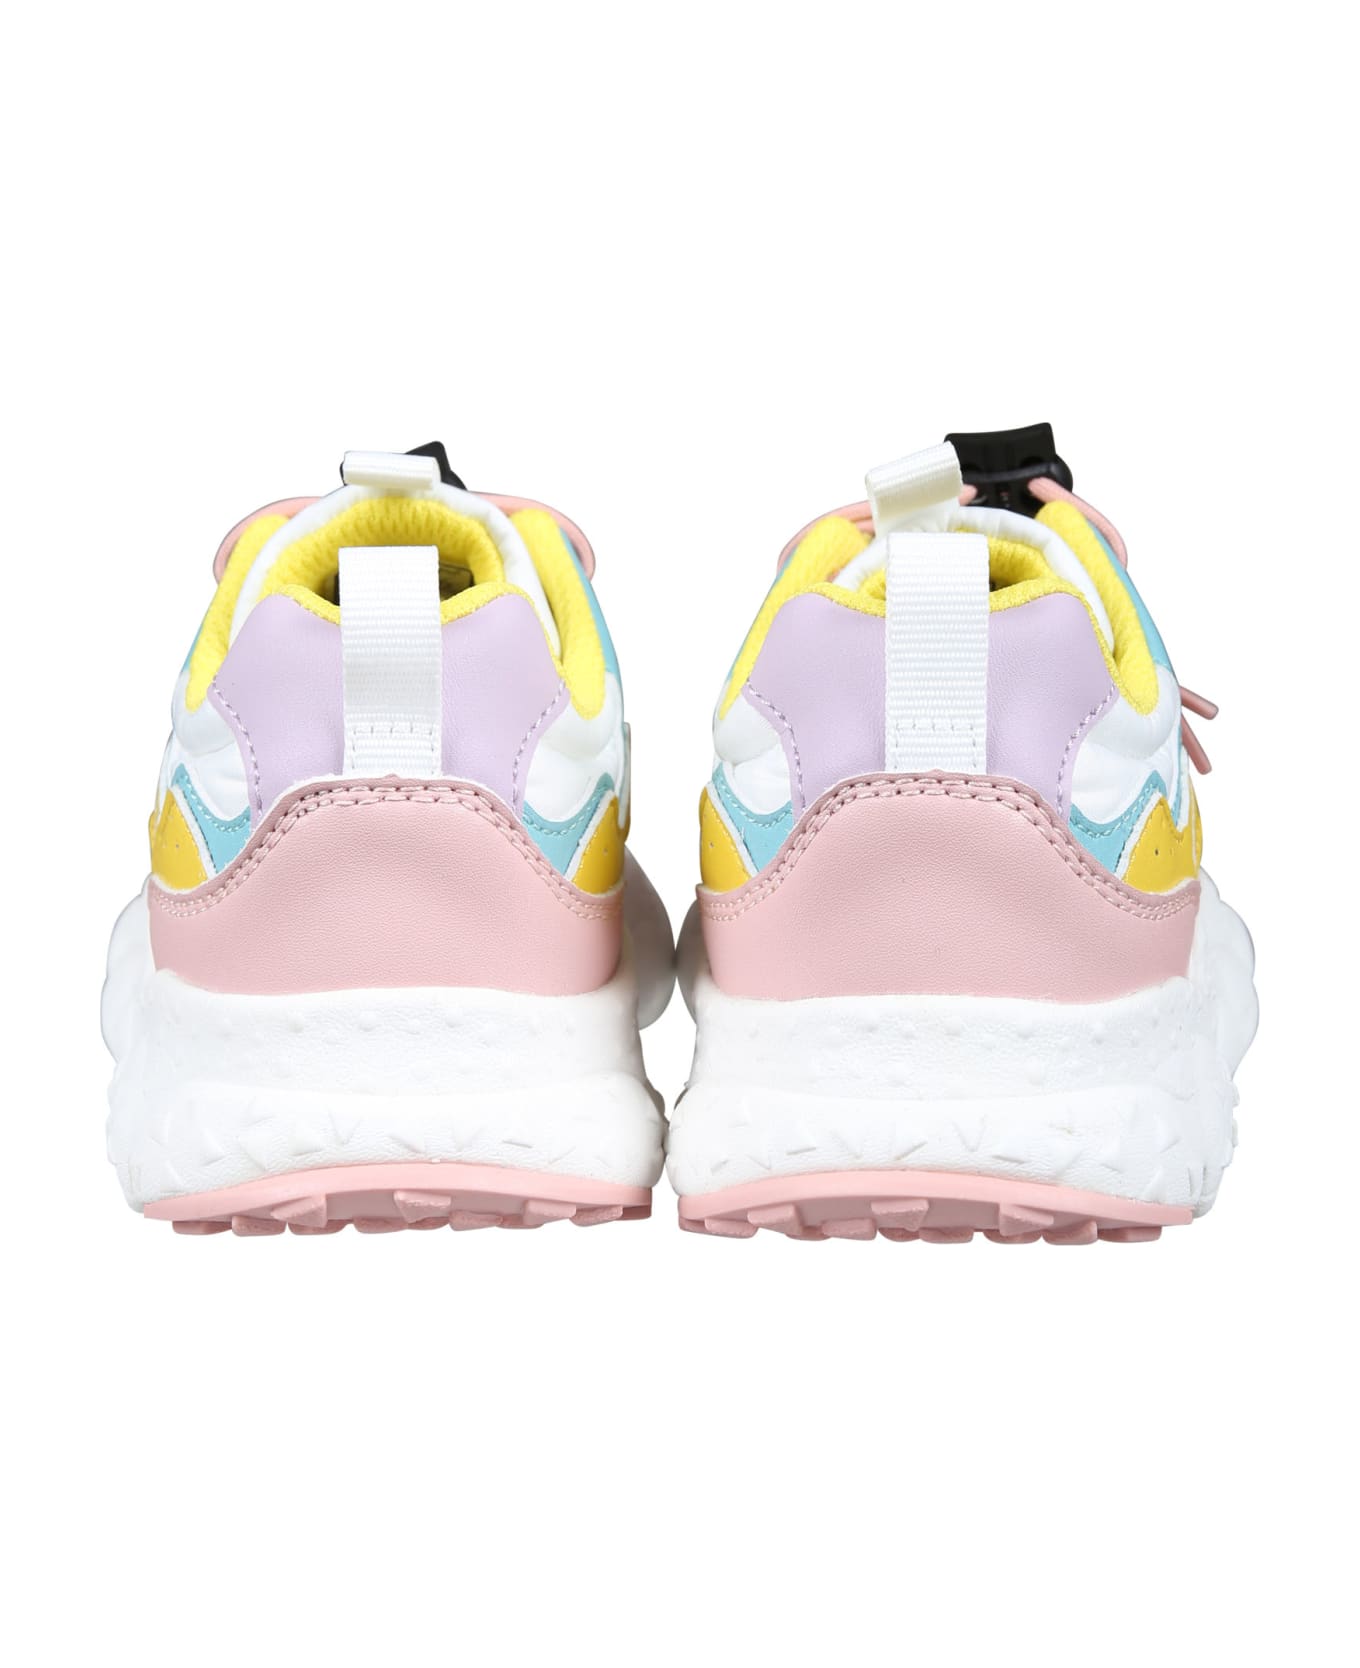 Flower Mountain Pink Yamano Sneakers For Girl With Logo - Pink シューズ